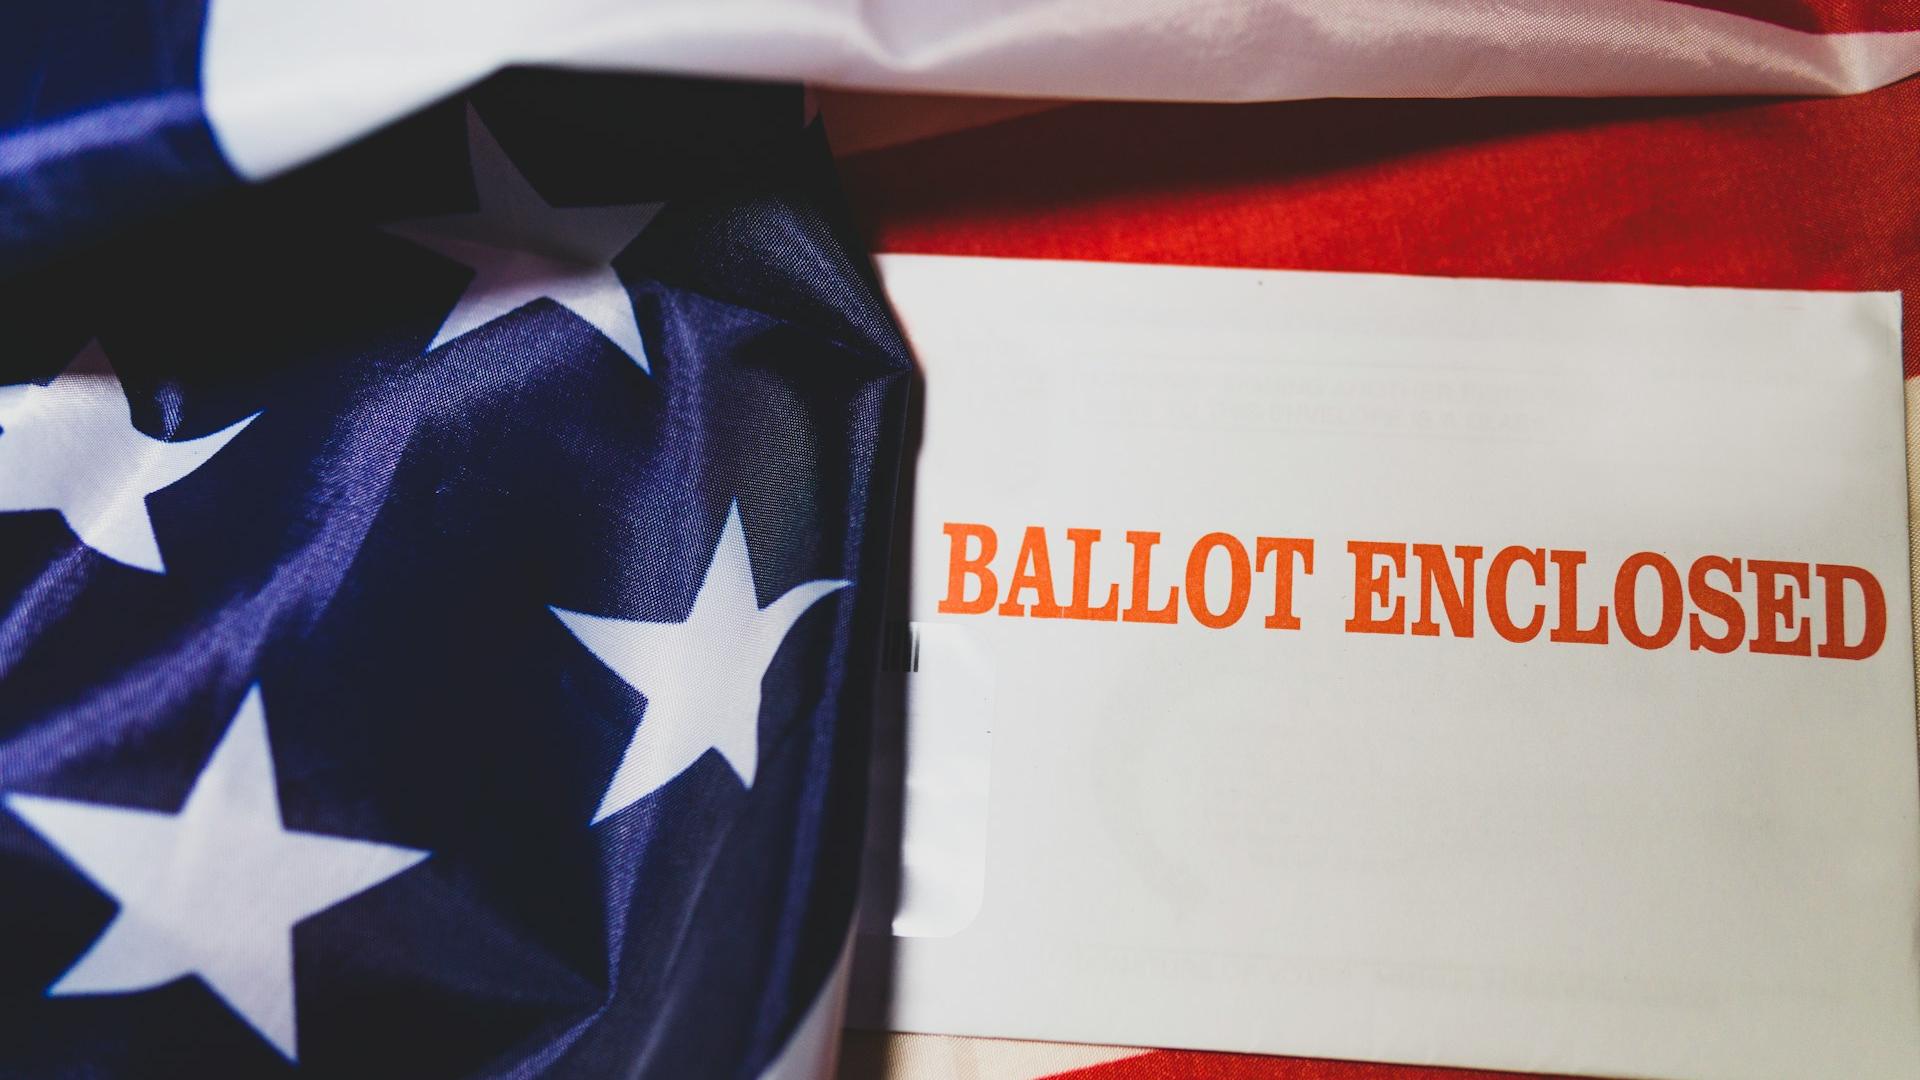 Photo of a paper ballot and American flag